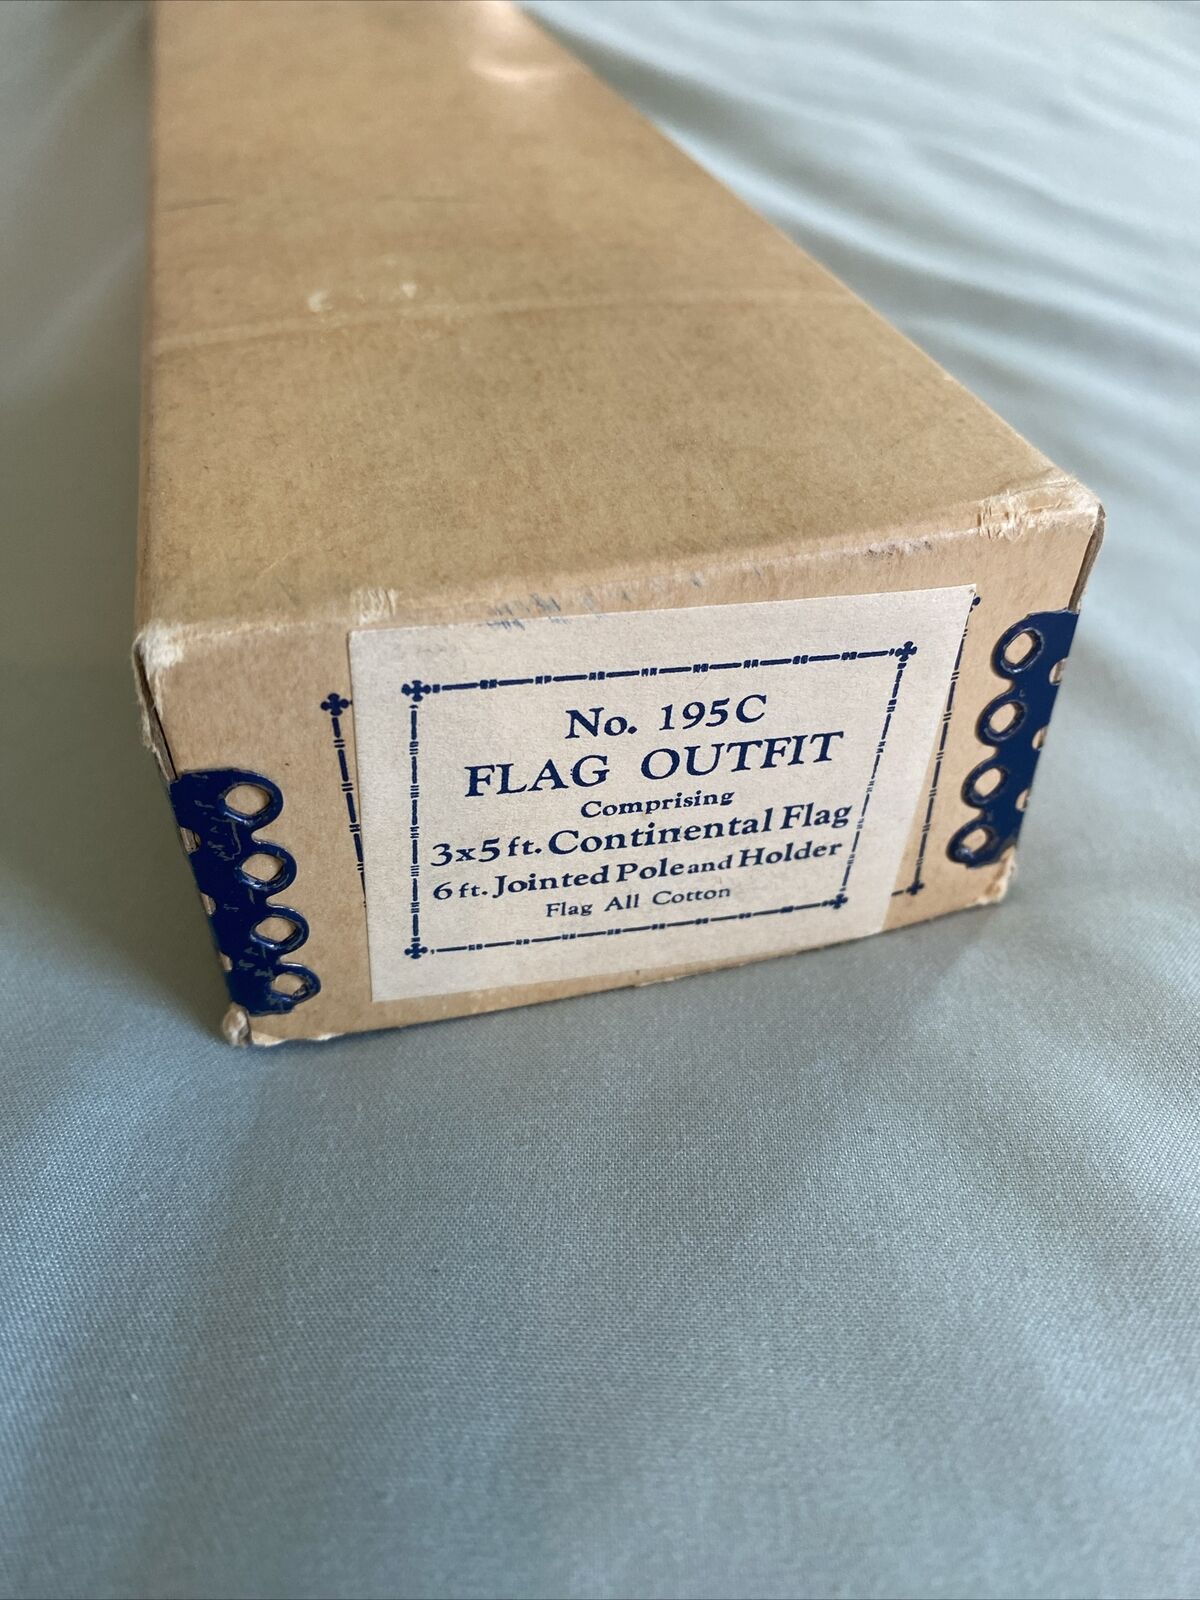 U.S. Flag Outfit No 195C Vintage 3x5 Flag 6 Ft Jointed Pole No Holder 50 State's